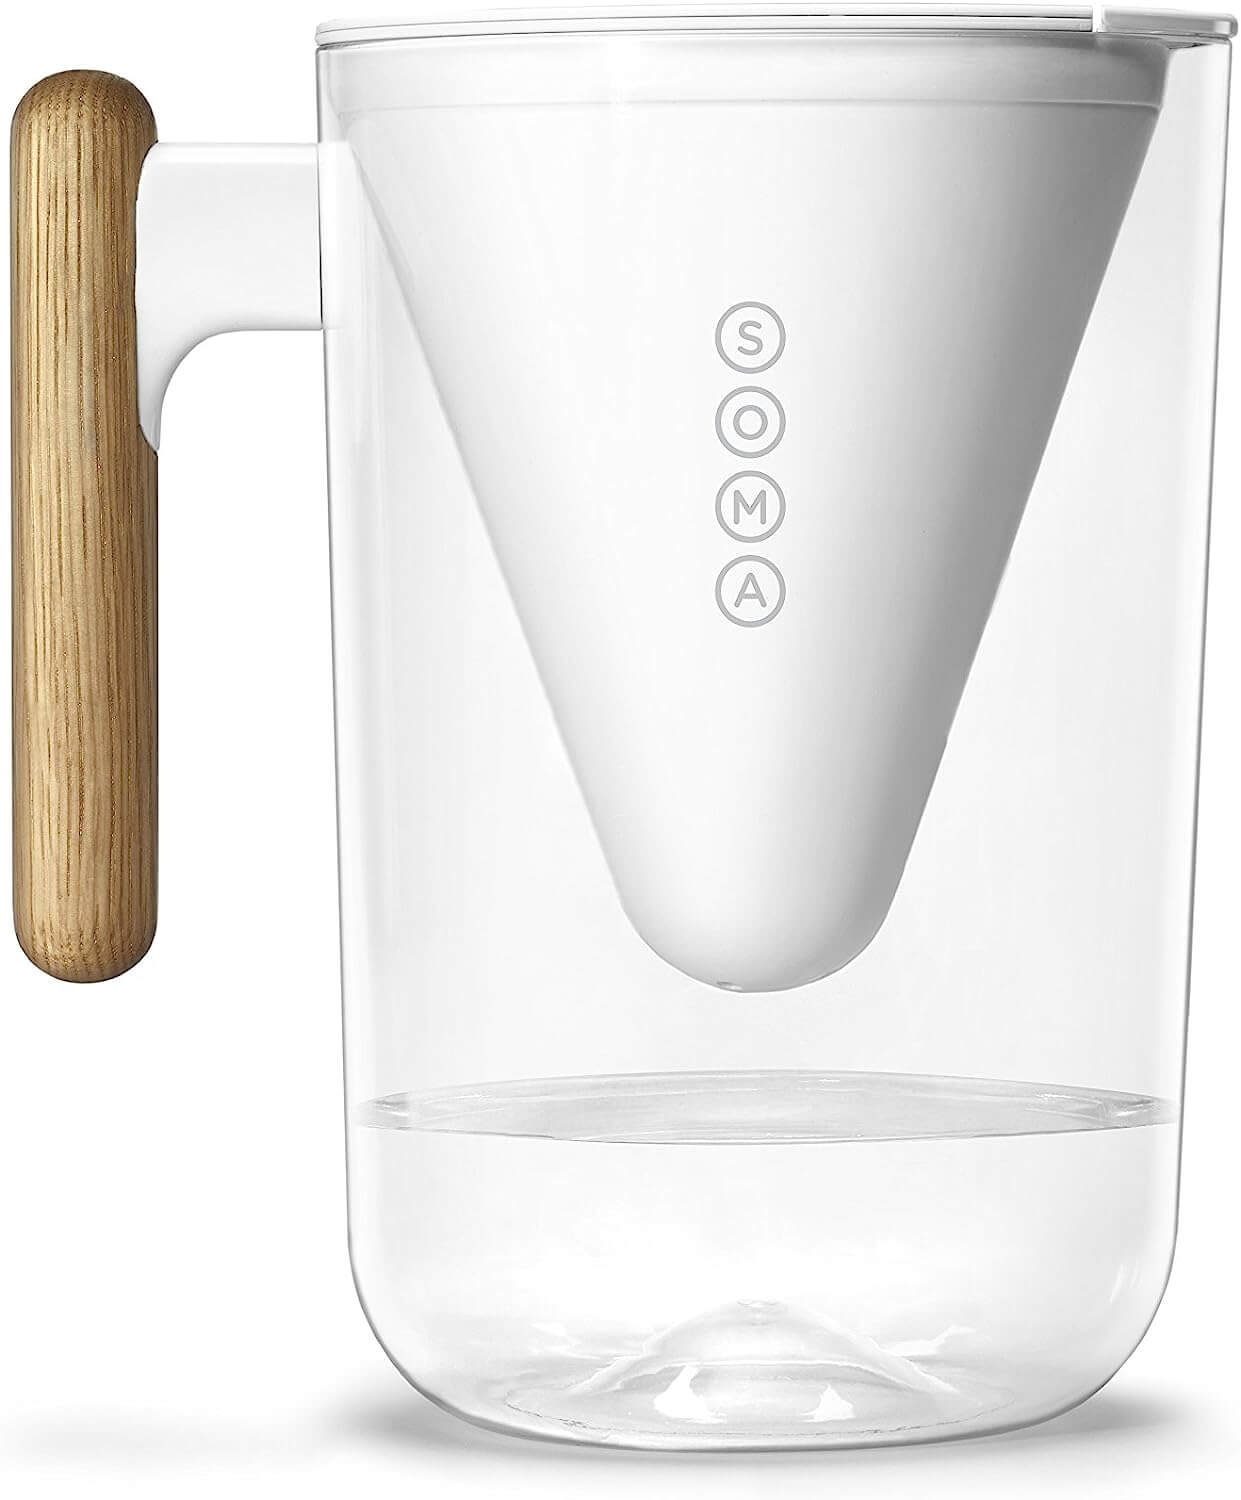 Soma 10-Cup Pitcher